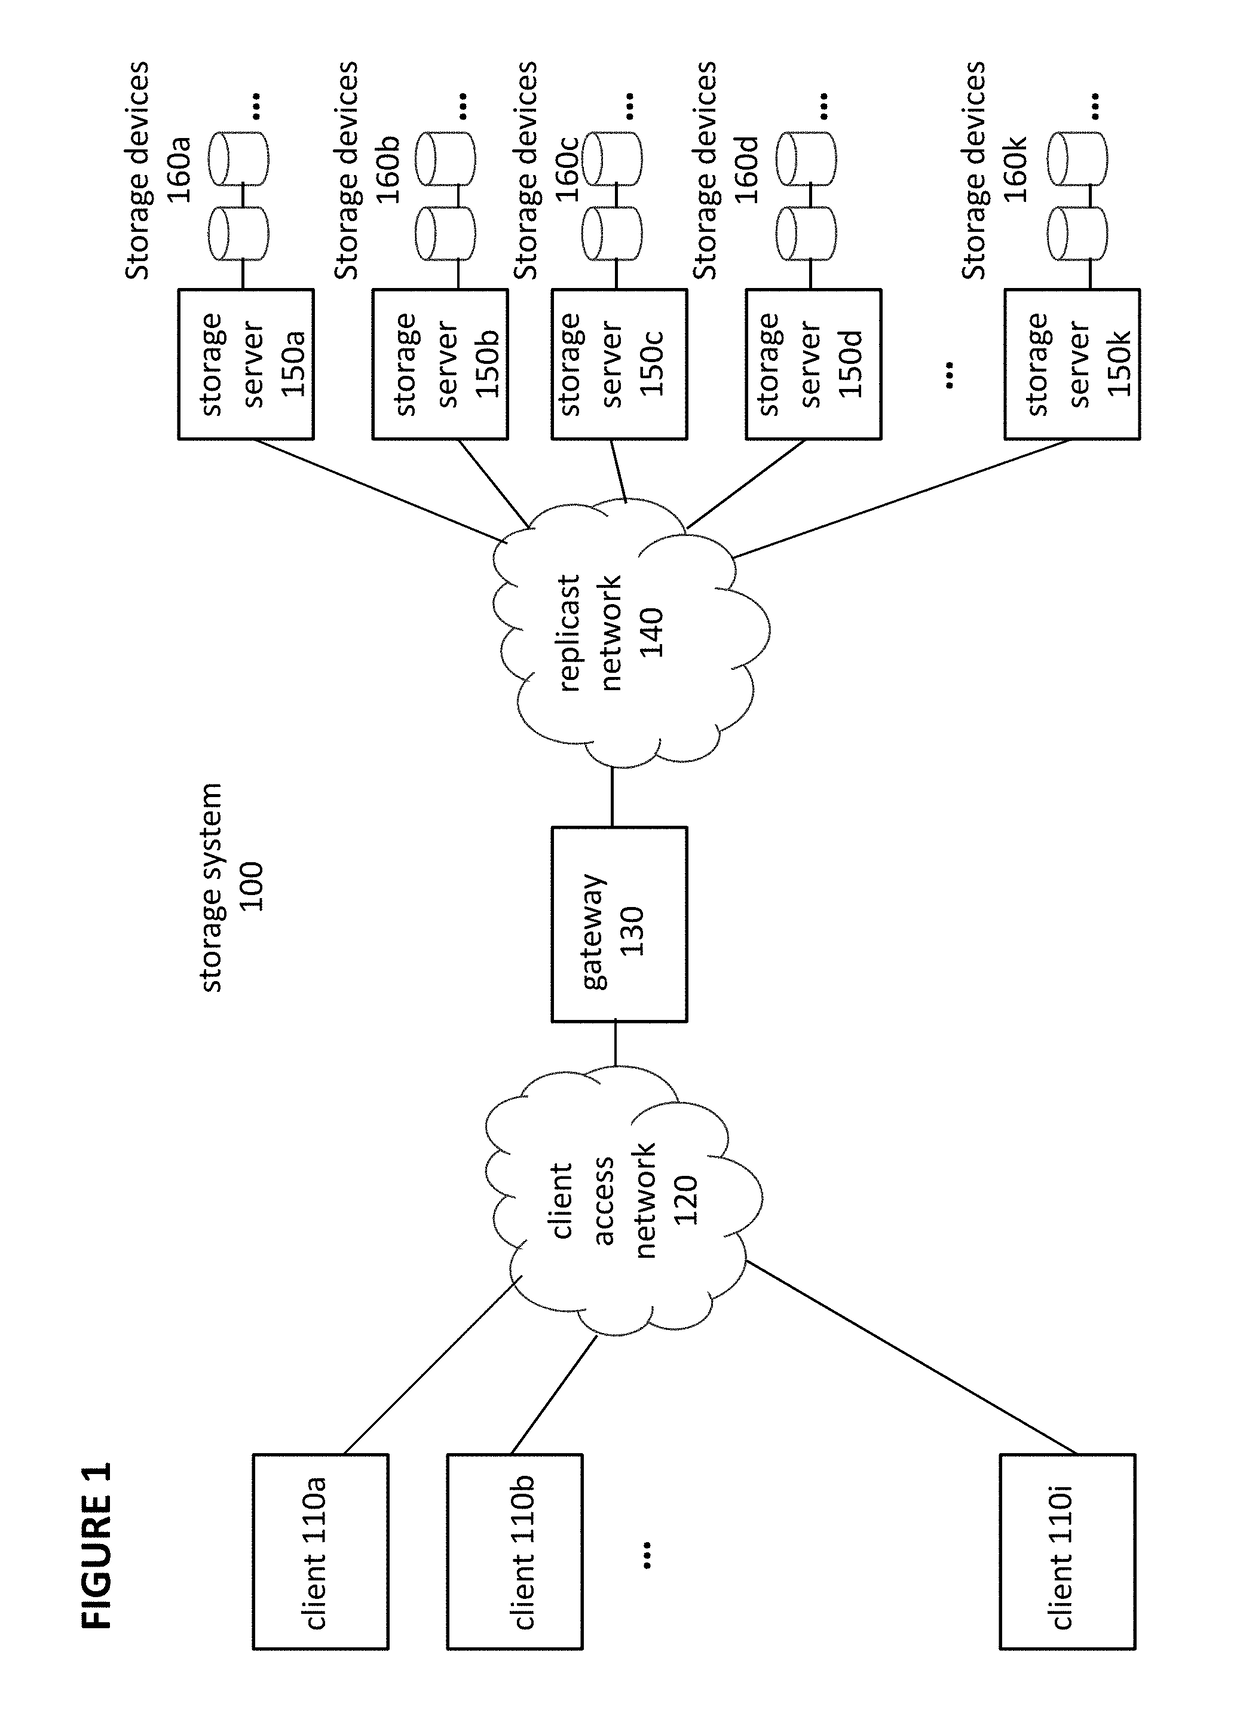 Parity protection for data chunks in an object storage system